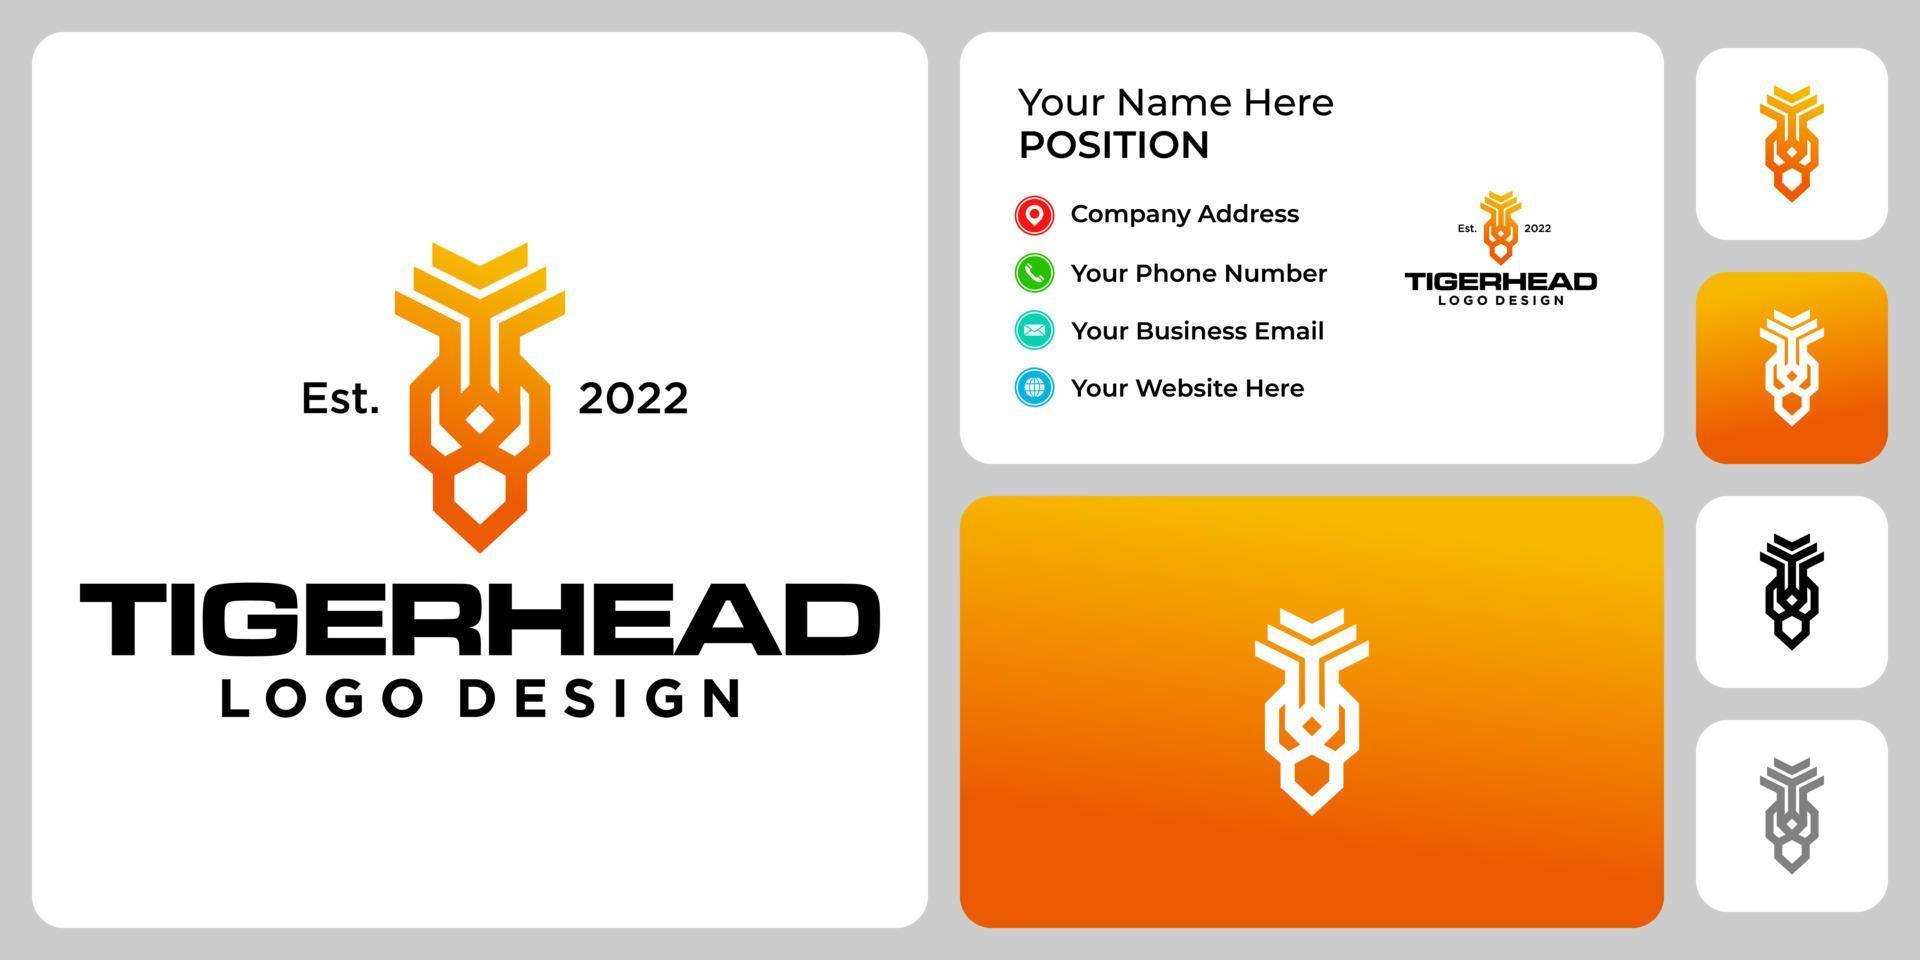 Tiger head logo design with business card template. vector